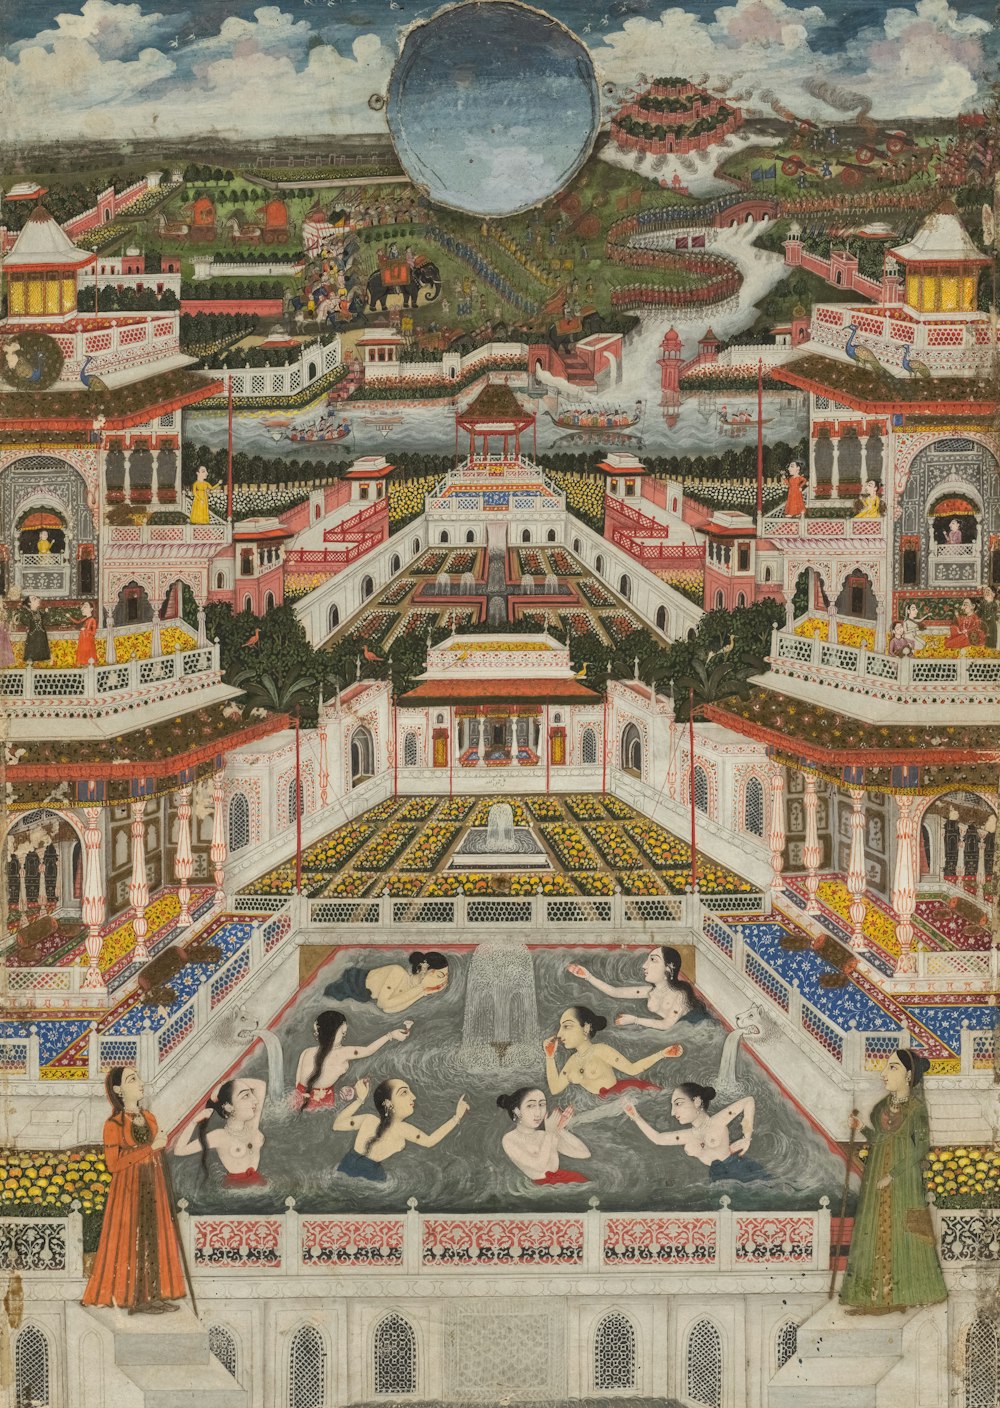 a painting of a palace with a pool surrounded by people